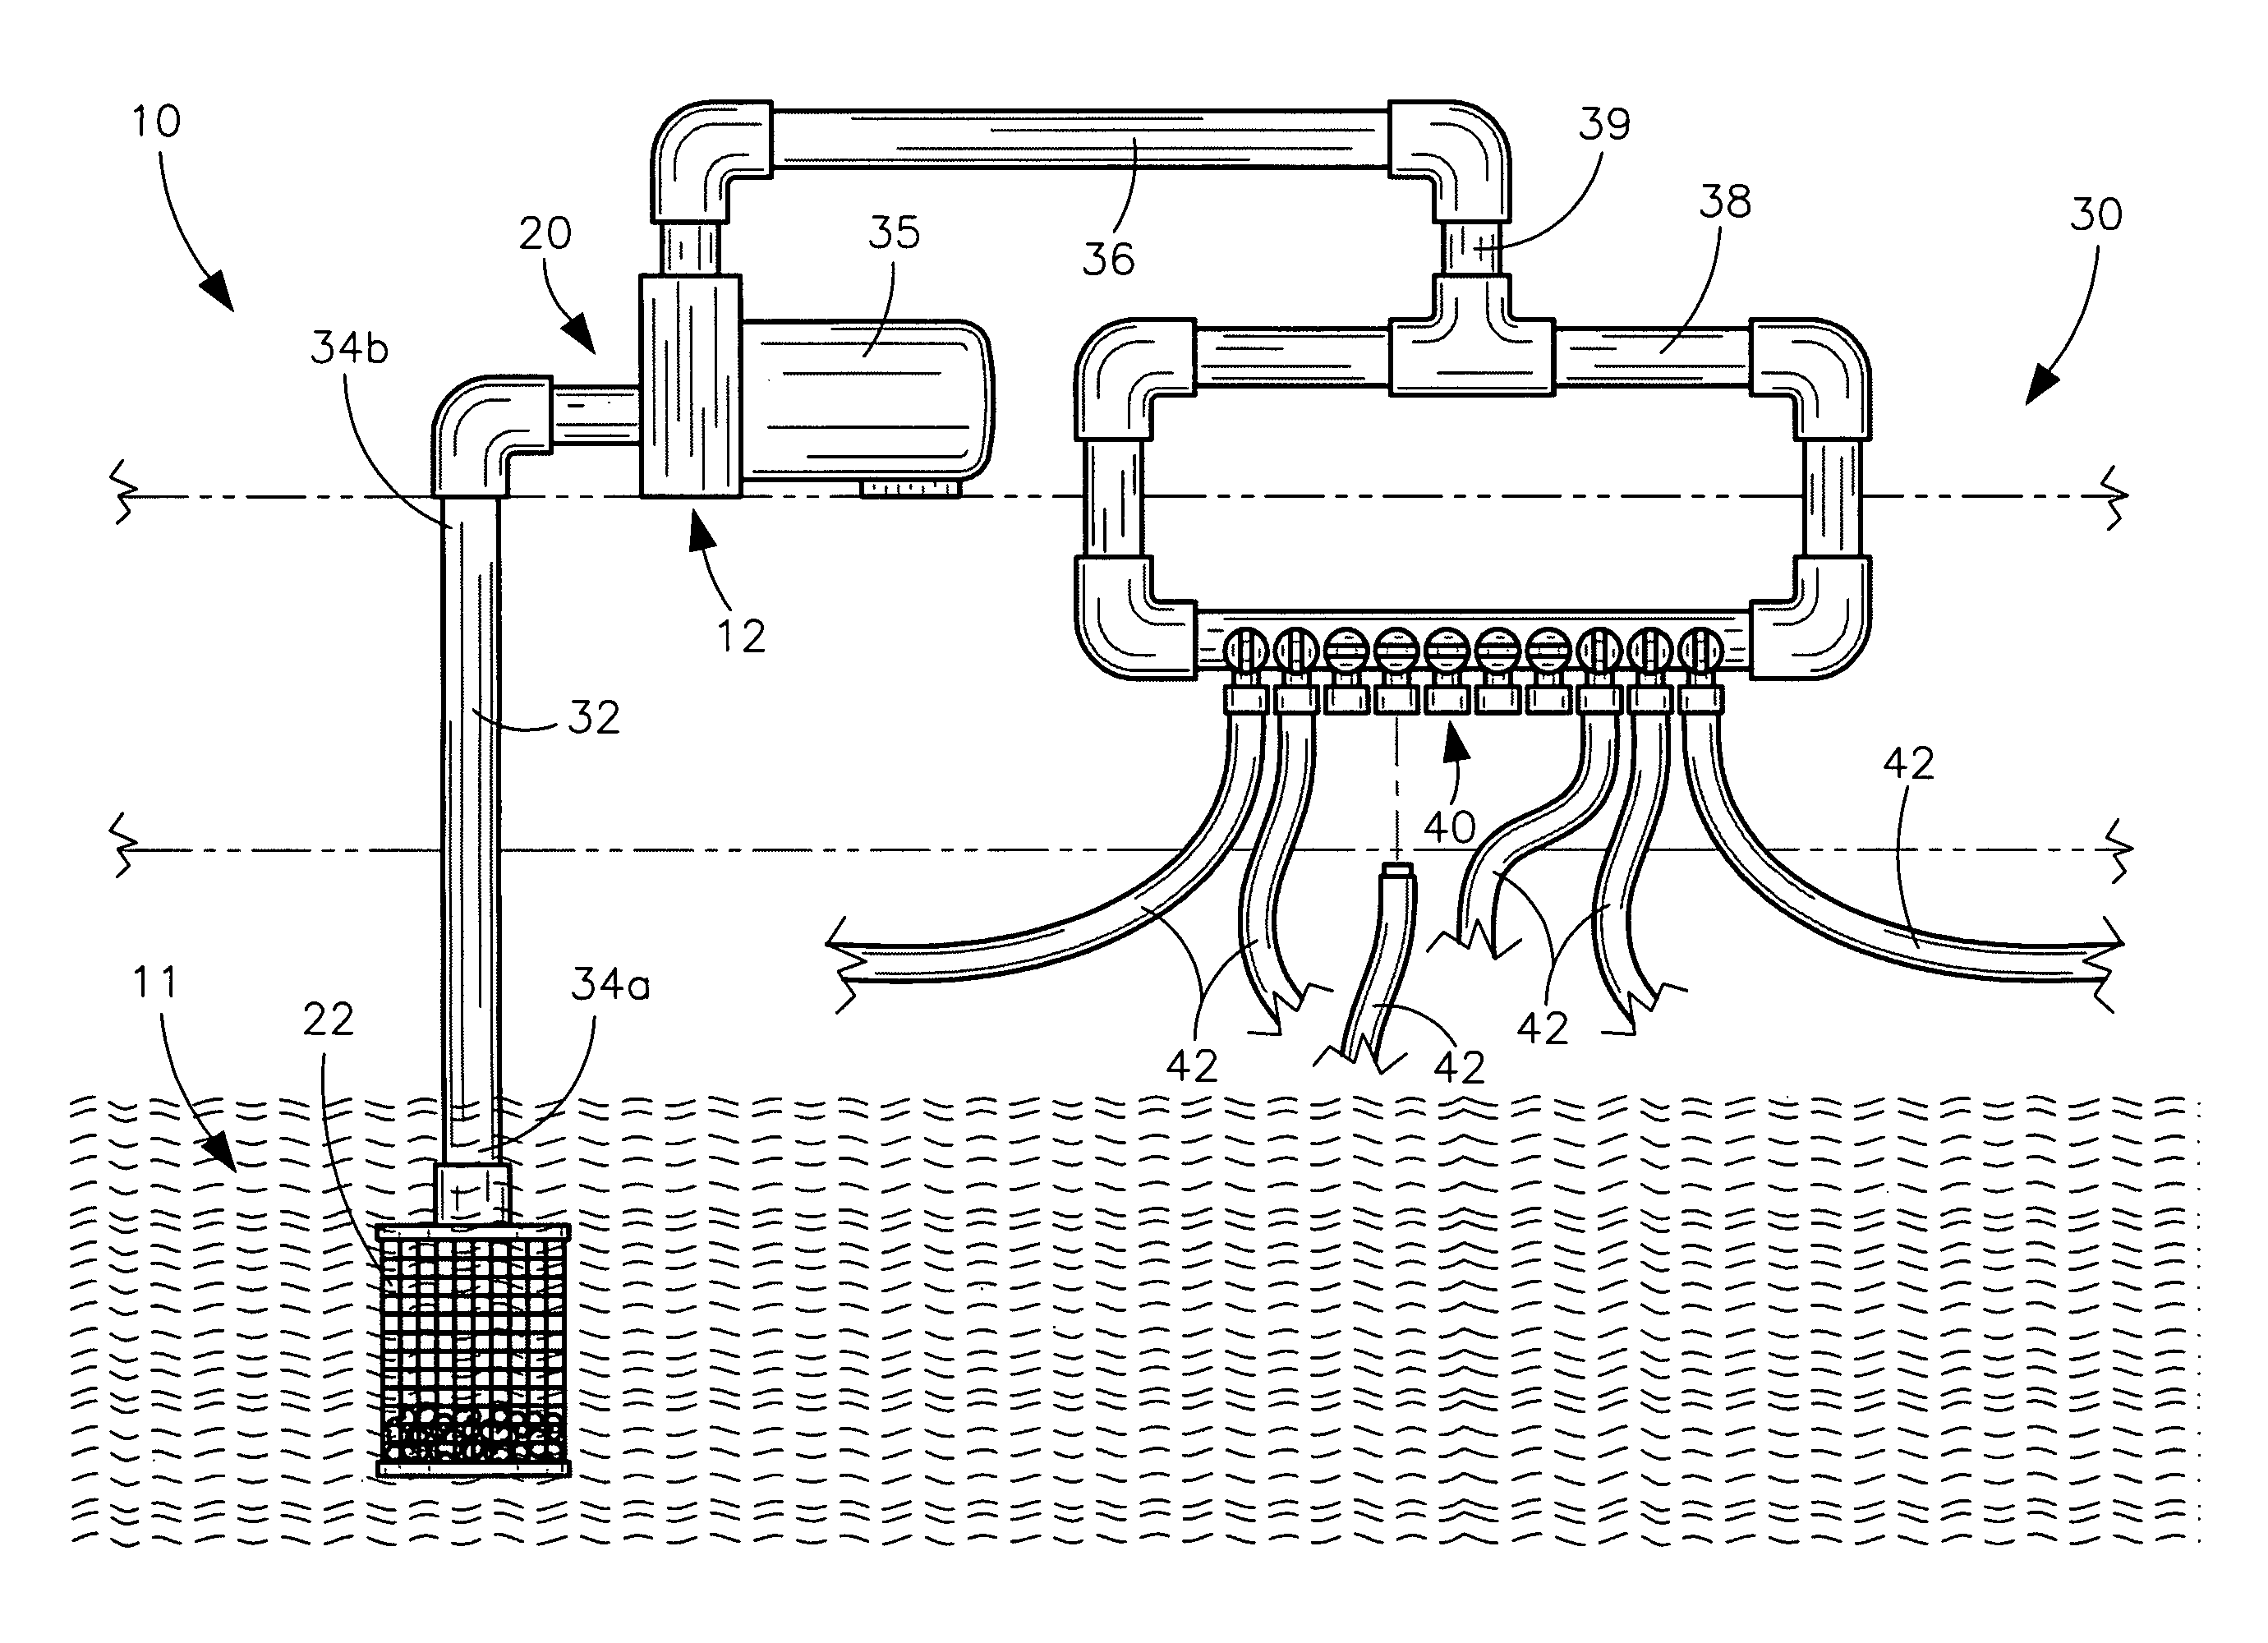 Floating weed and debris removal system and associated method